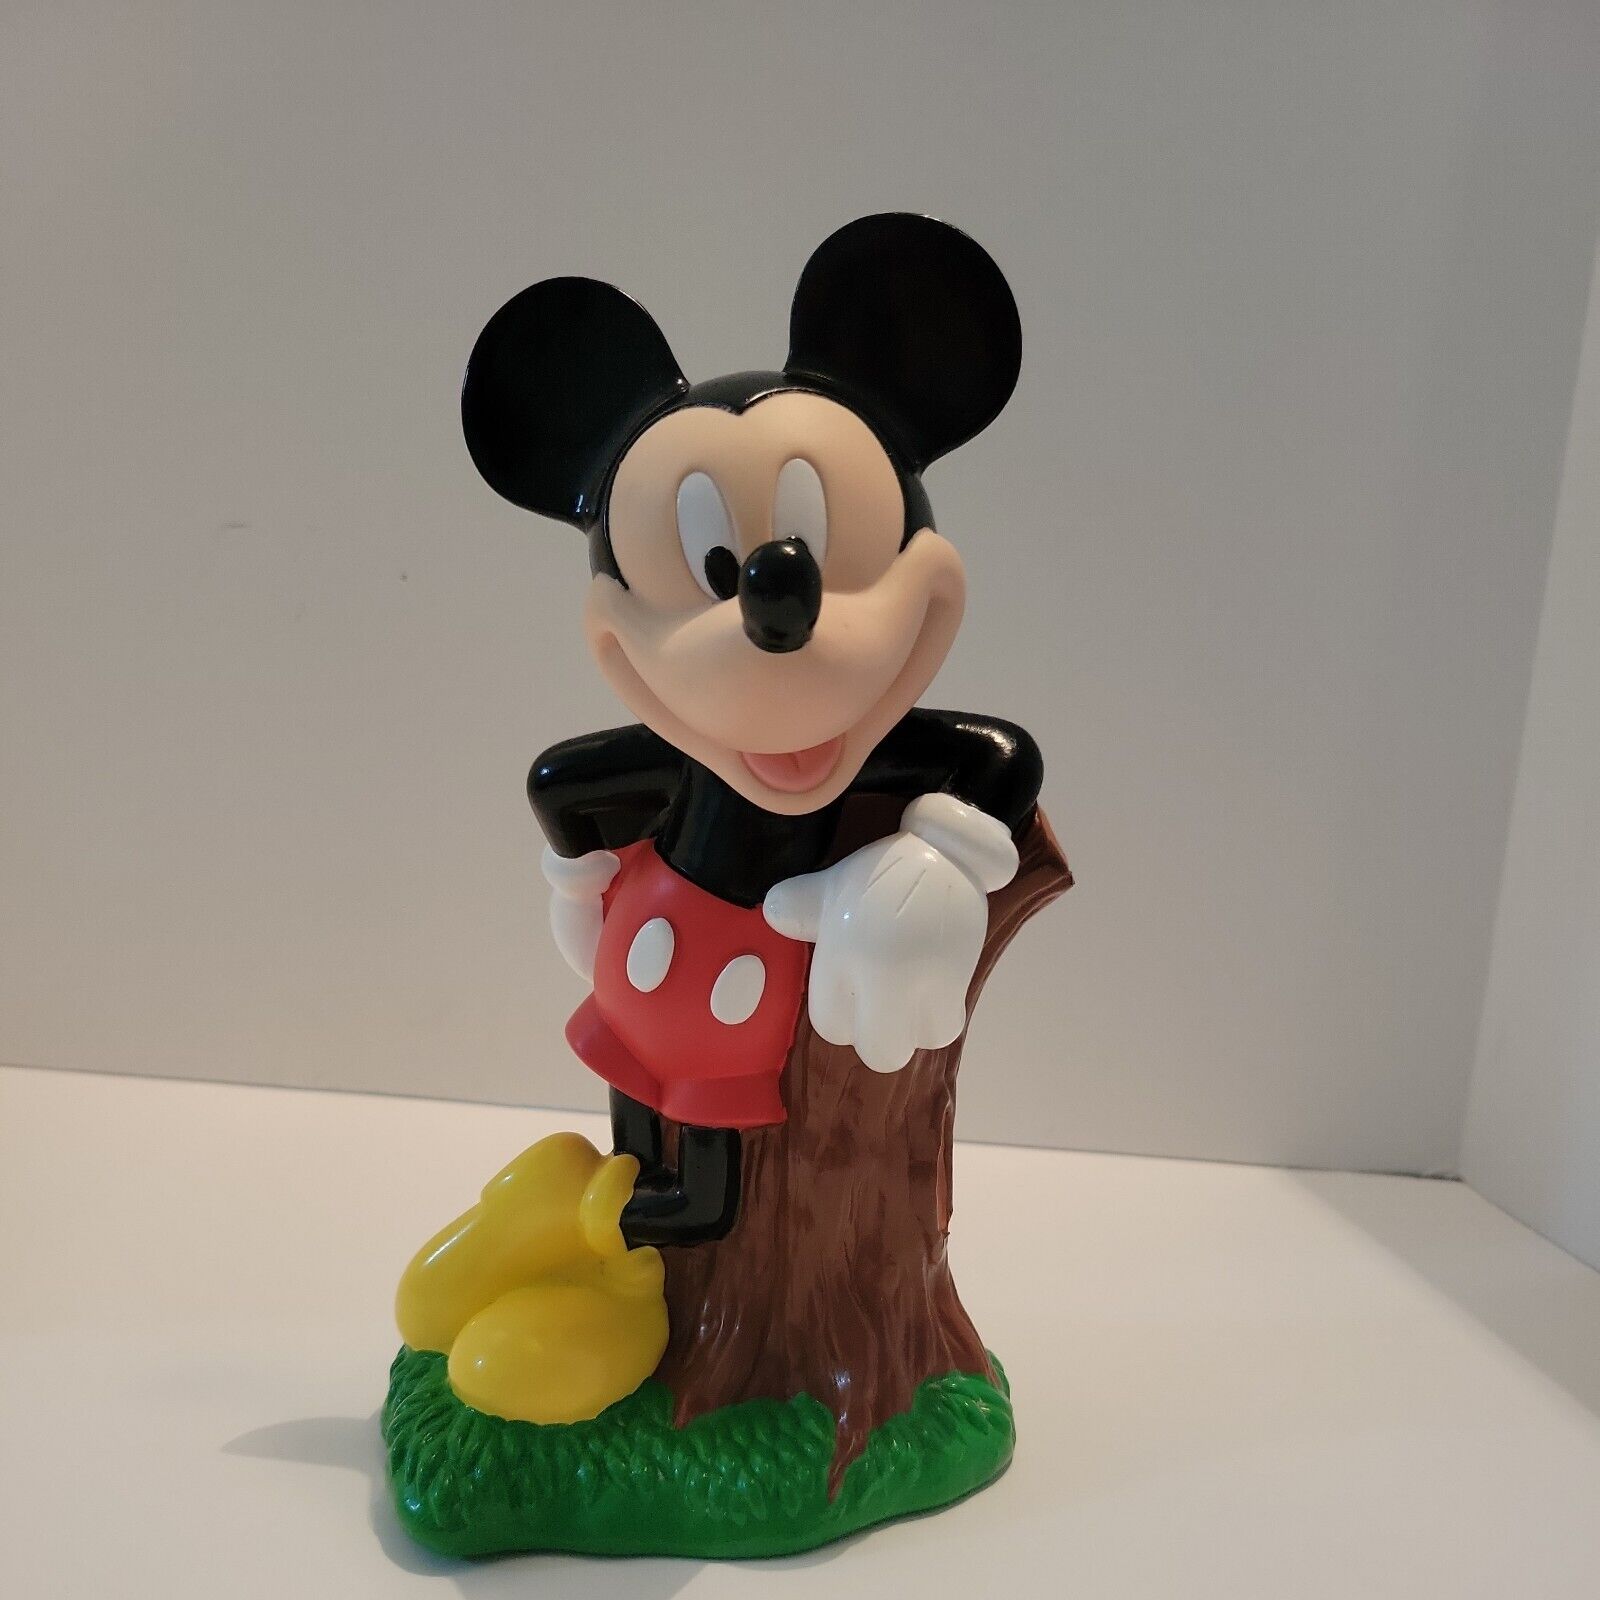 Disney Mickey Mouse Leaning On Tree Stump Piggy Bank Just Toys Inc 1994 Plastic